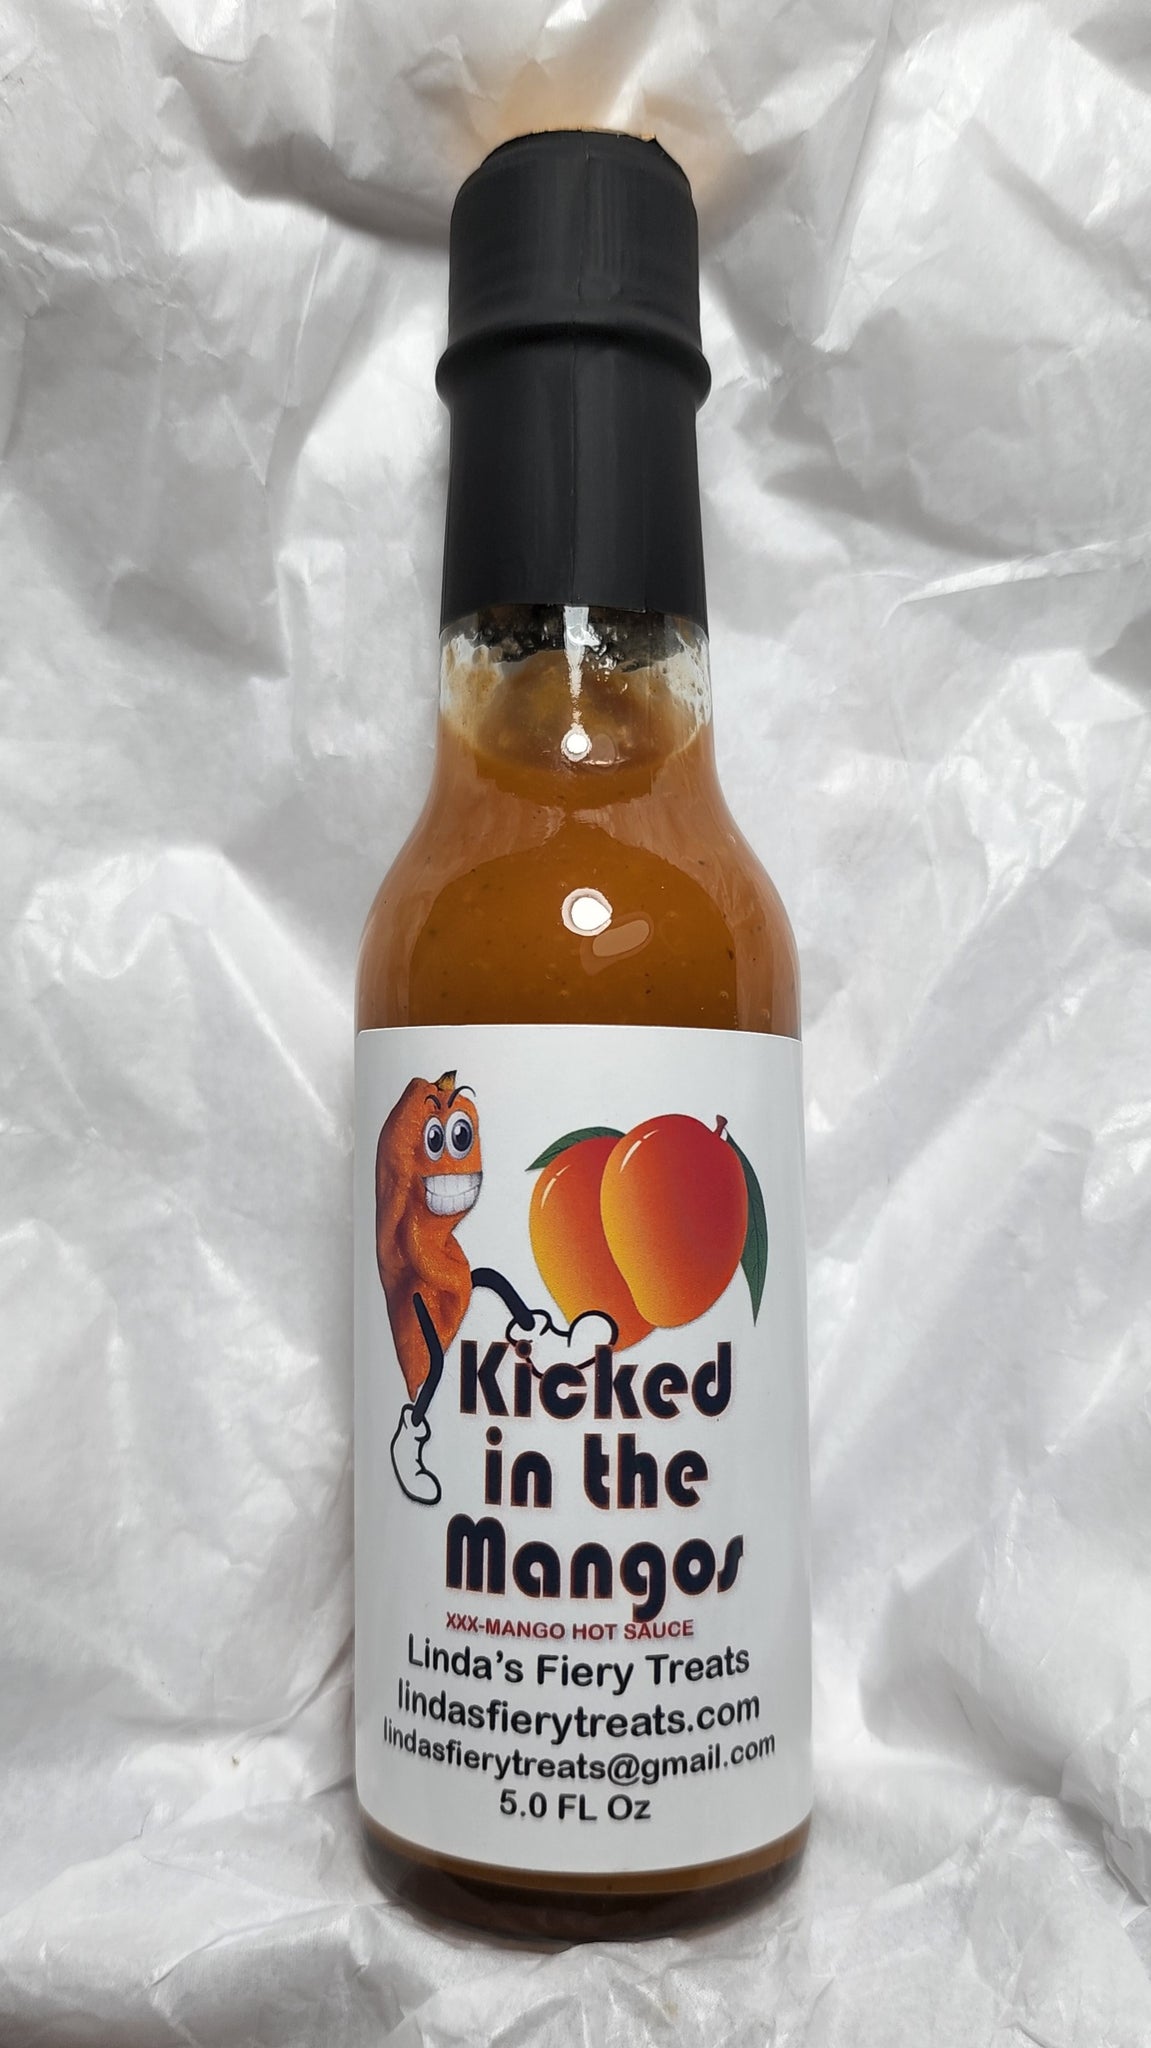 Hot sauce - Kicked in the Mangos